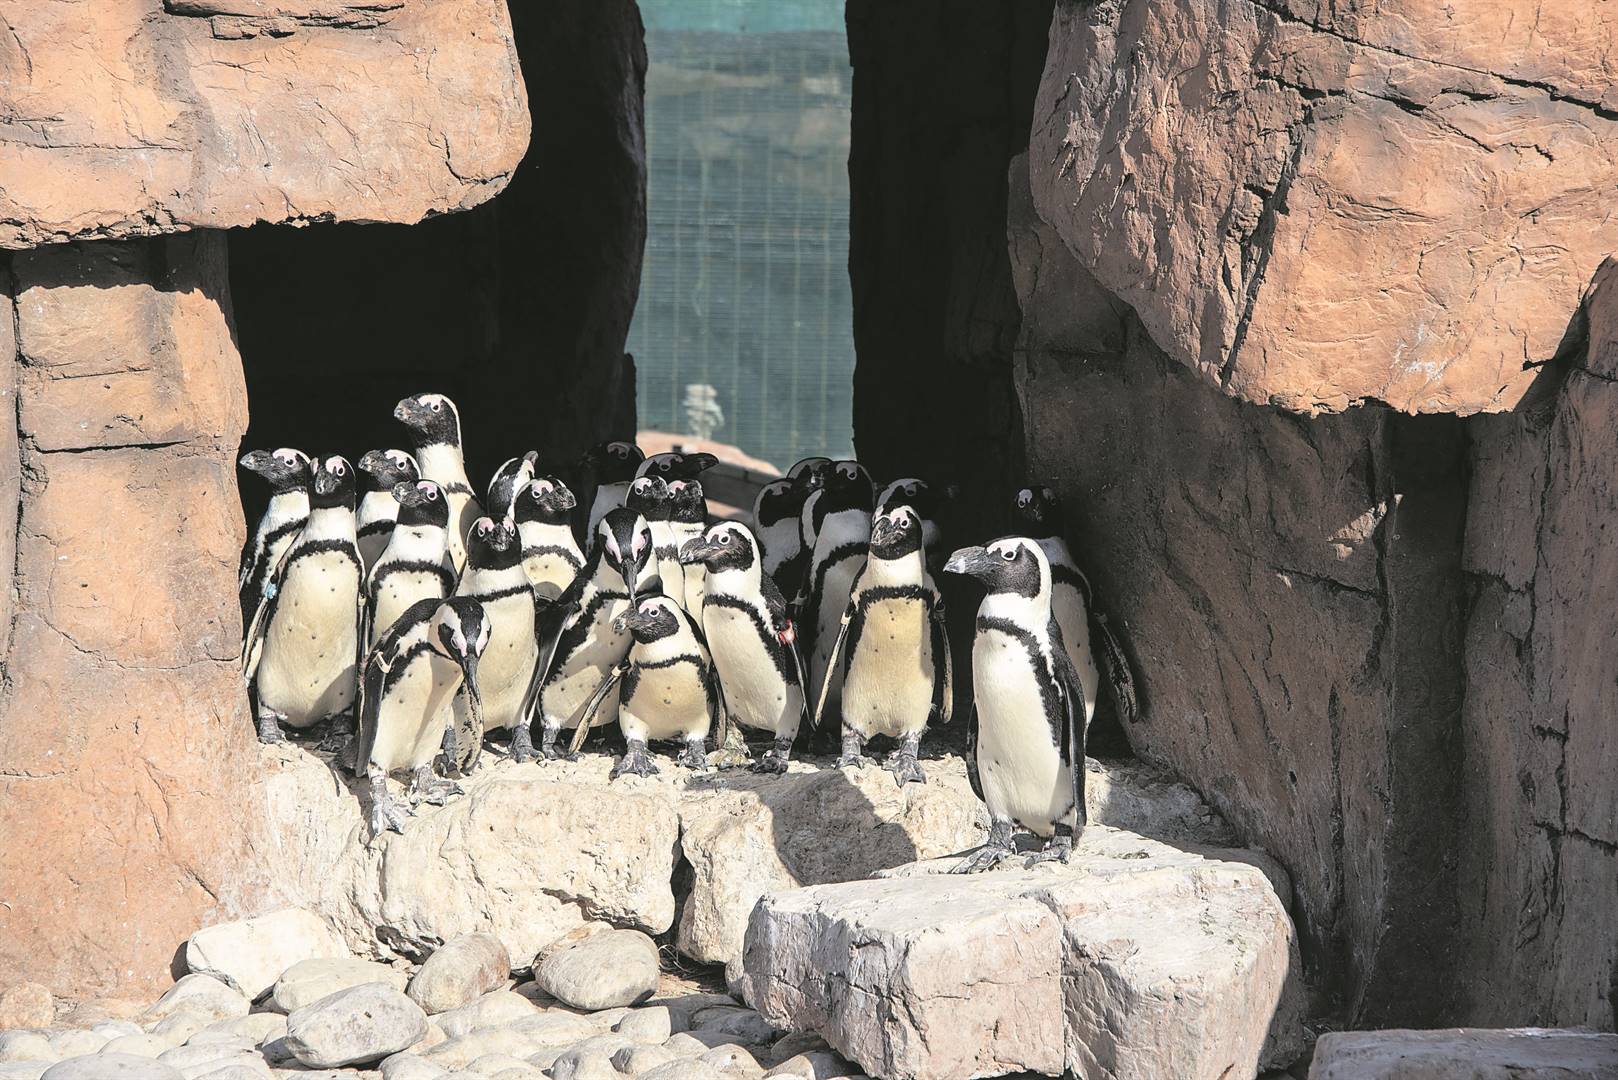 The jury is still out on what is causing the decline in African Penguin numbers, writes the author. (Photo: Pauline Herman)